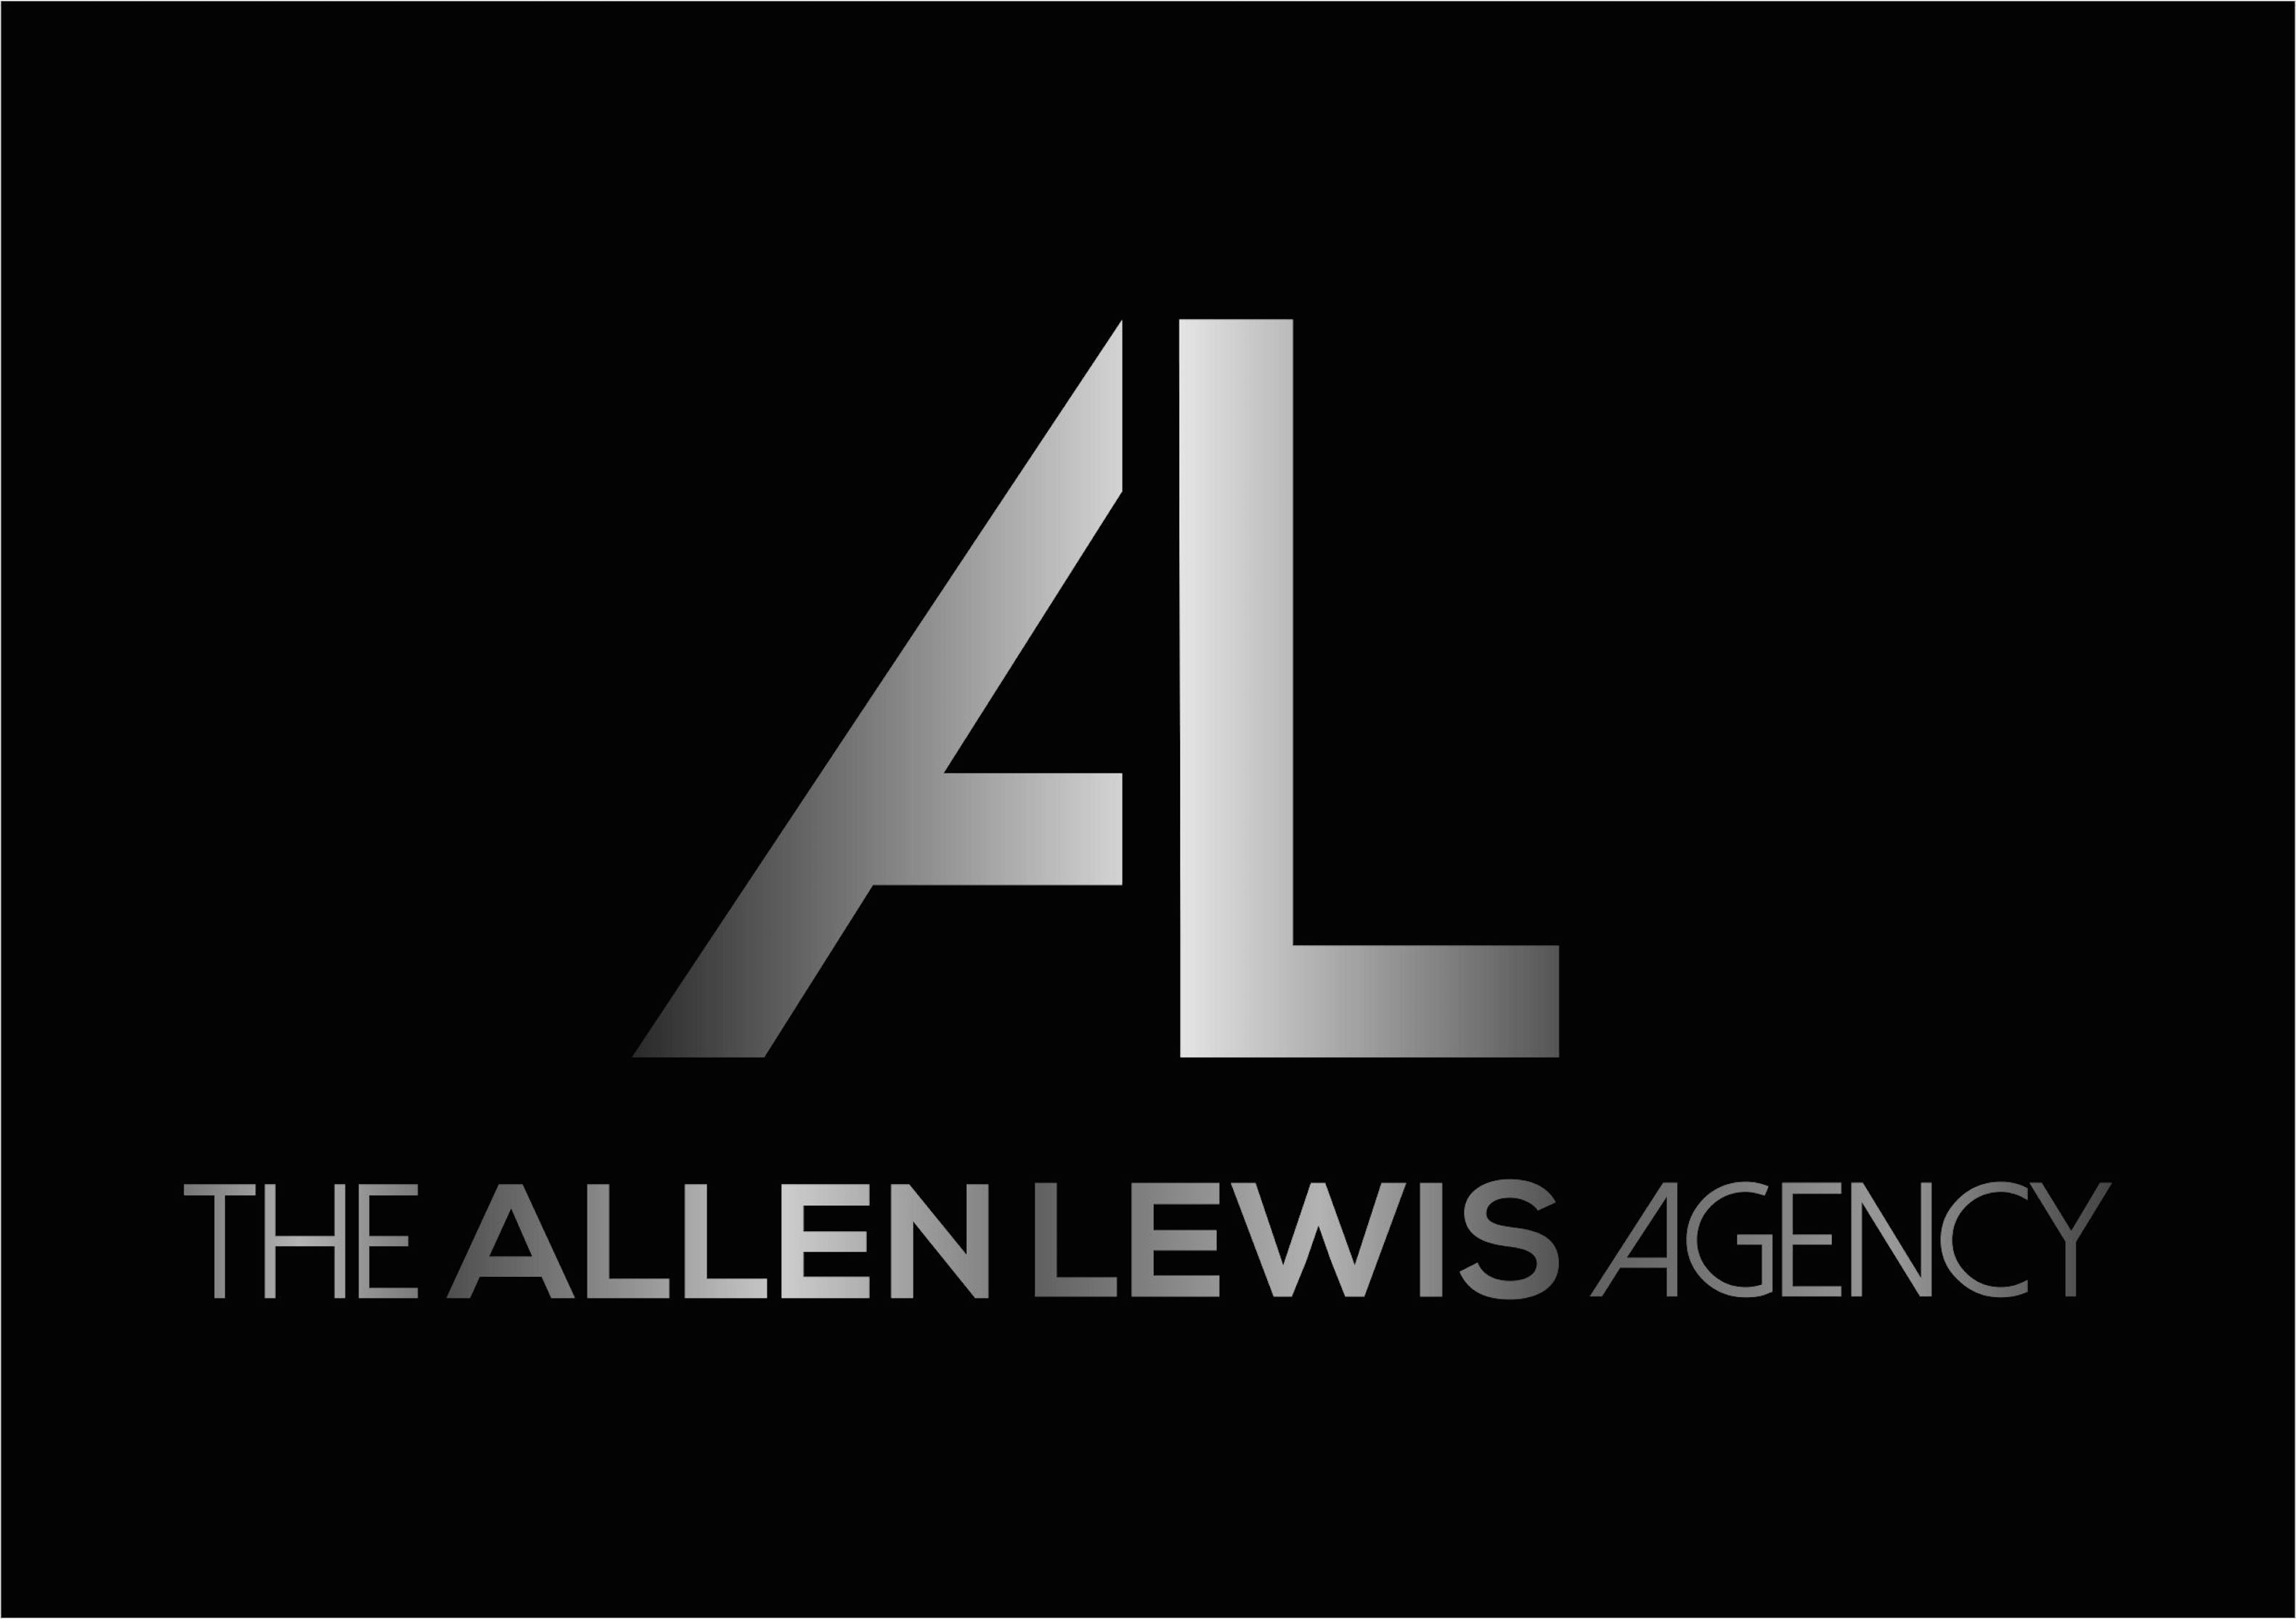 The Allen Lewis Agency (TALA) is committed to helping clients tell their stories, build their brands, commemorate experiences and expand their business.